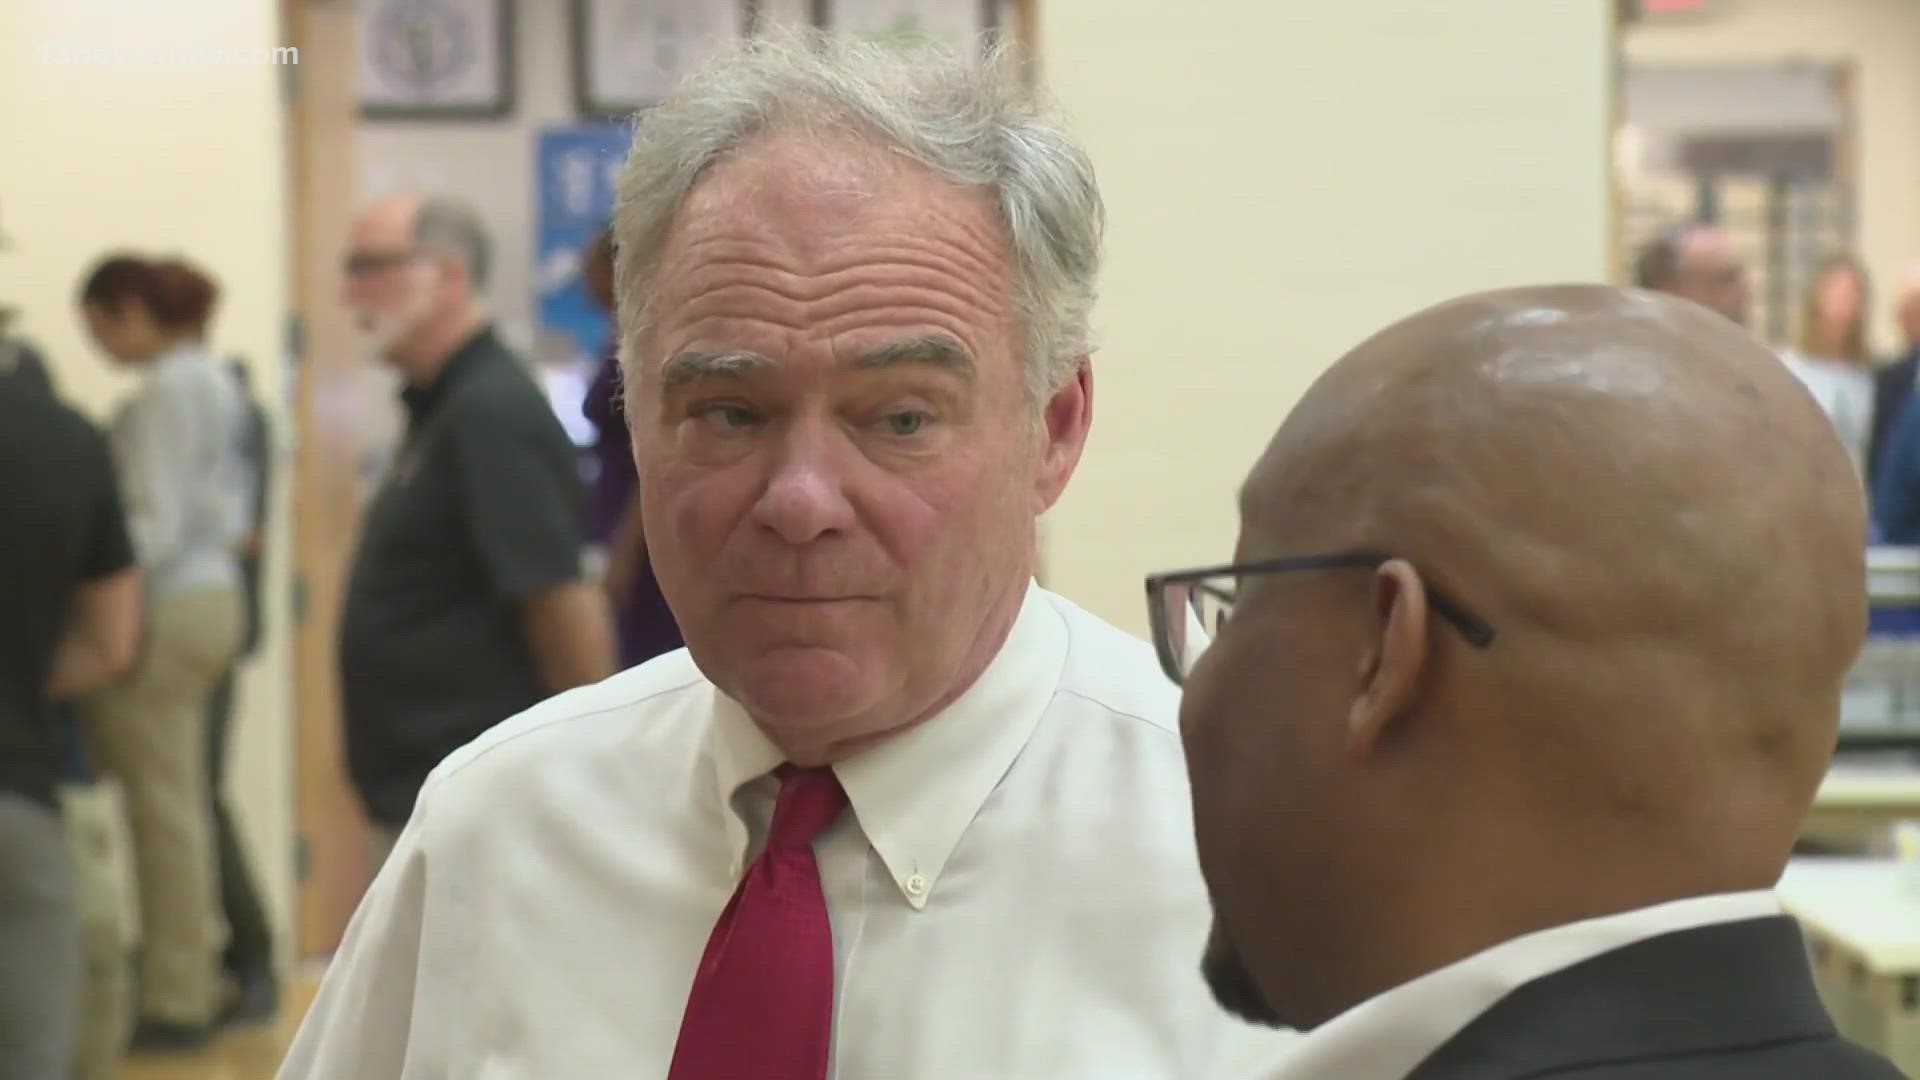 On Friday, Senator Tim Kaine spoke with local stakeholders about what they can do to help boost the workforce.